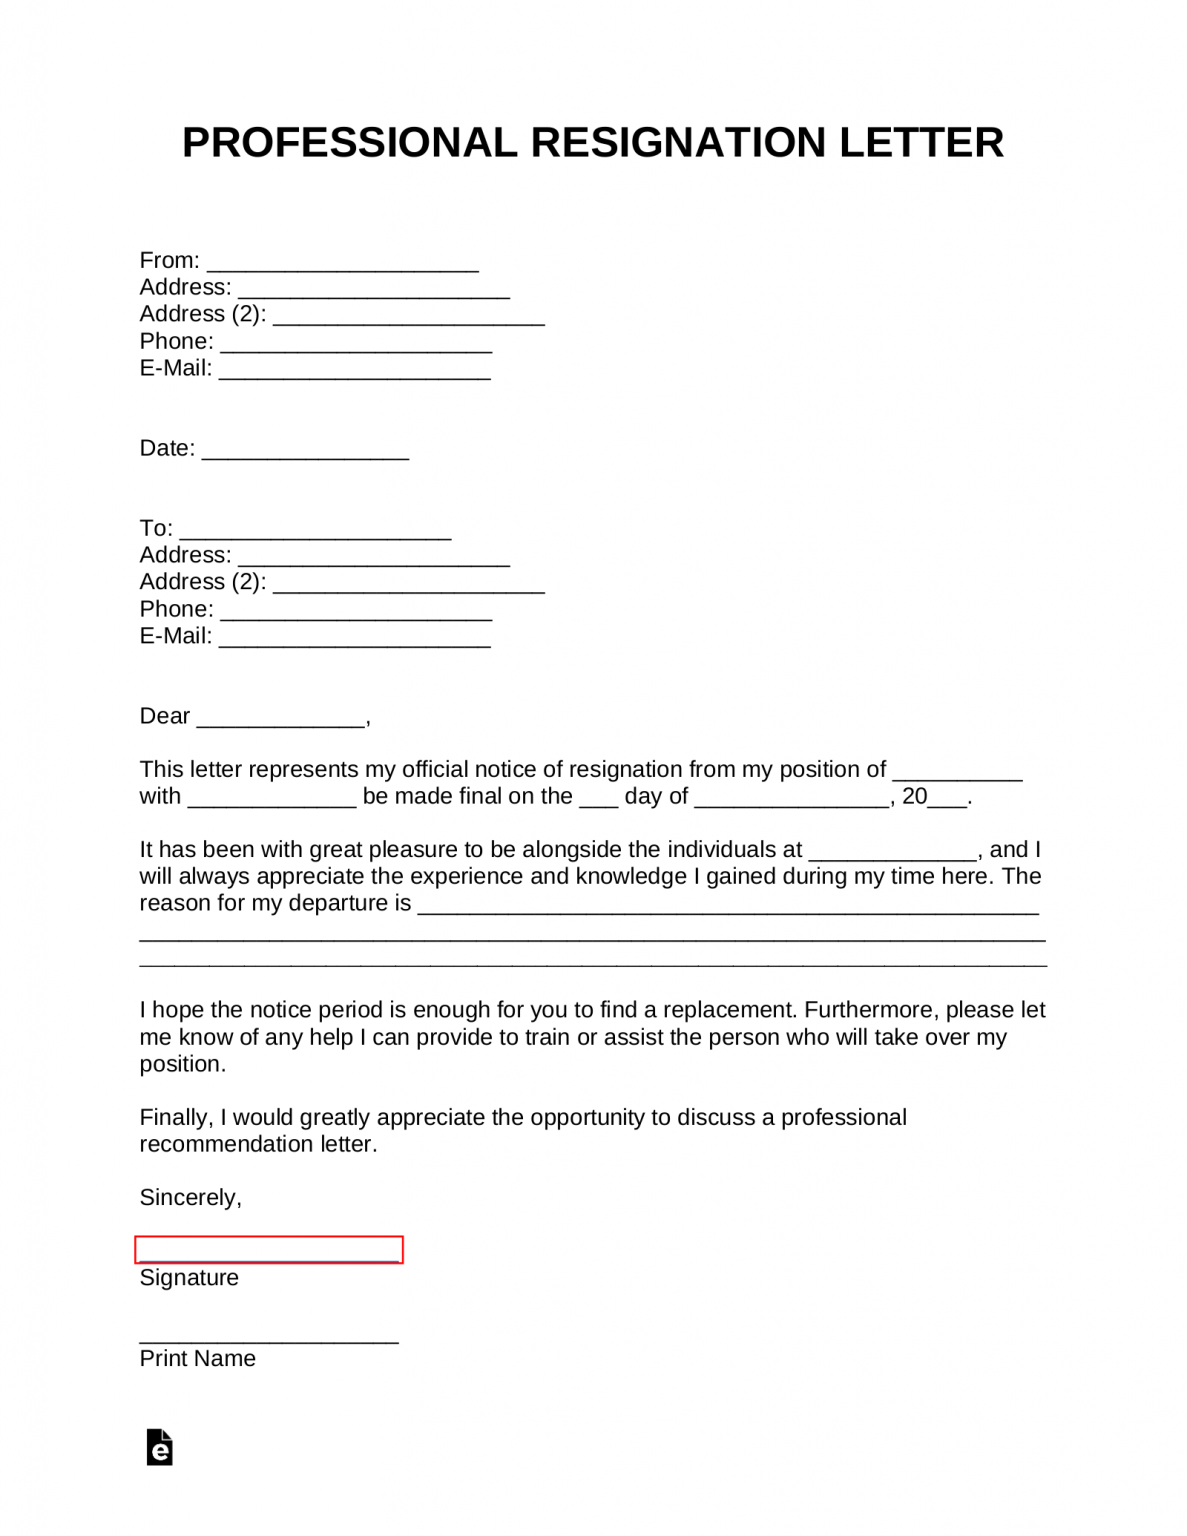 Free Professional Resignation Letter Template - with Samples - PDF ...